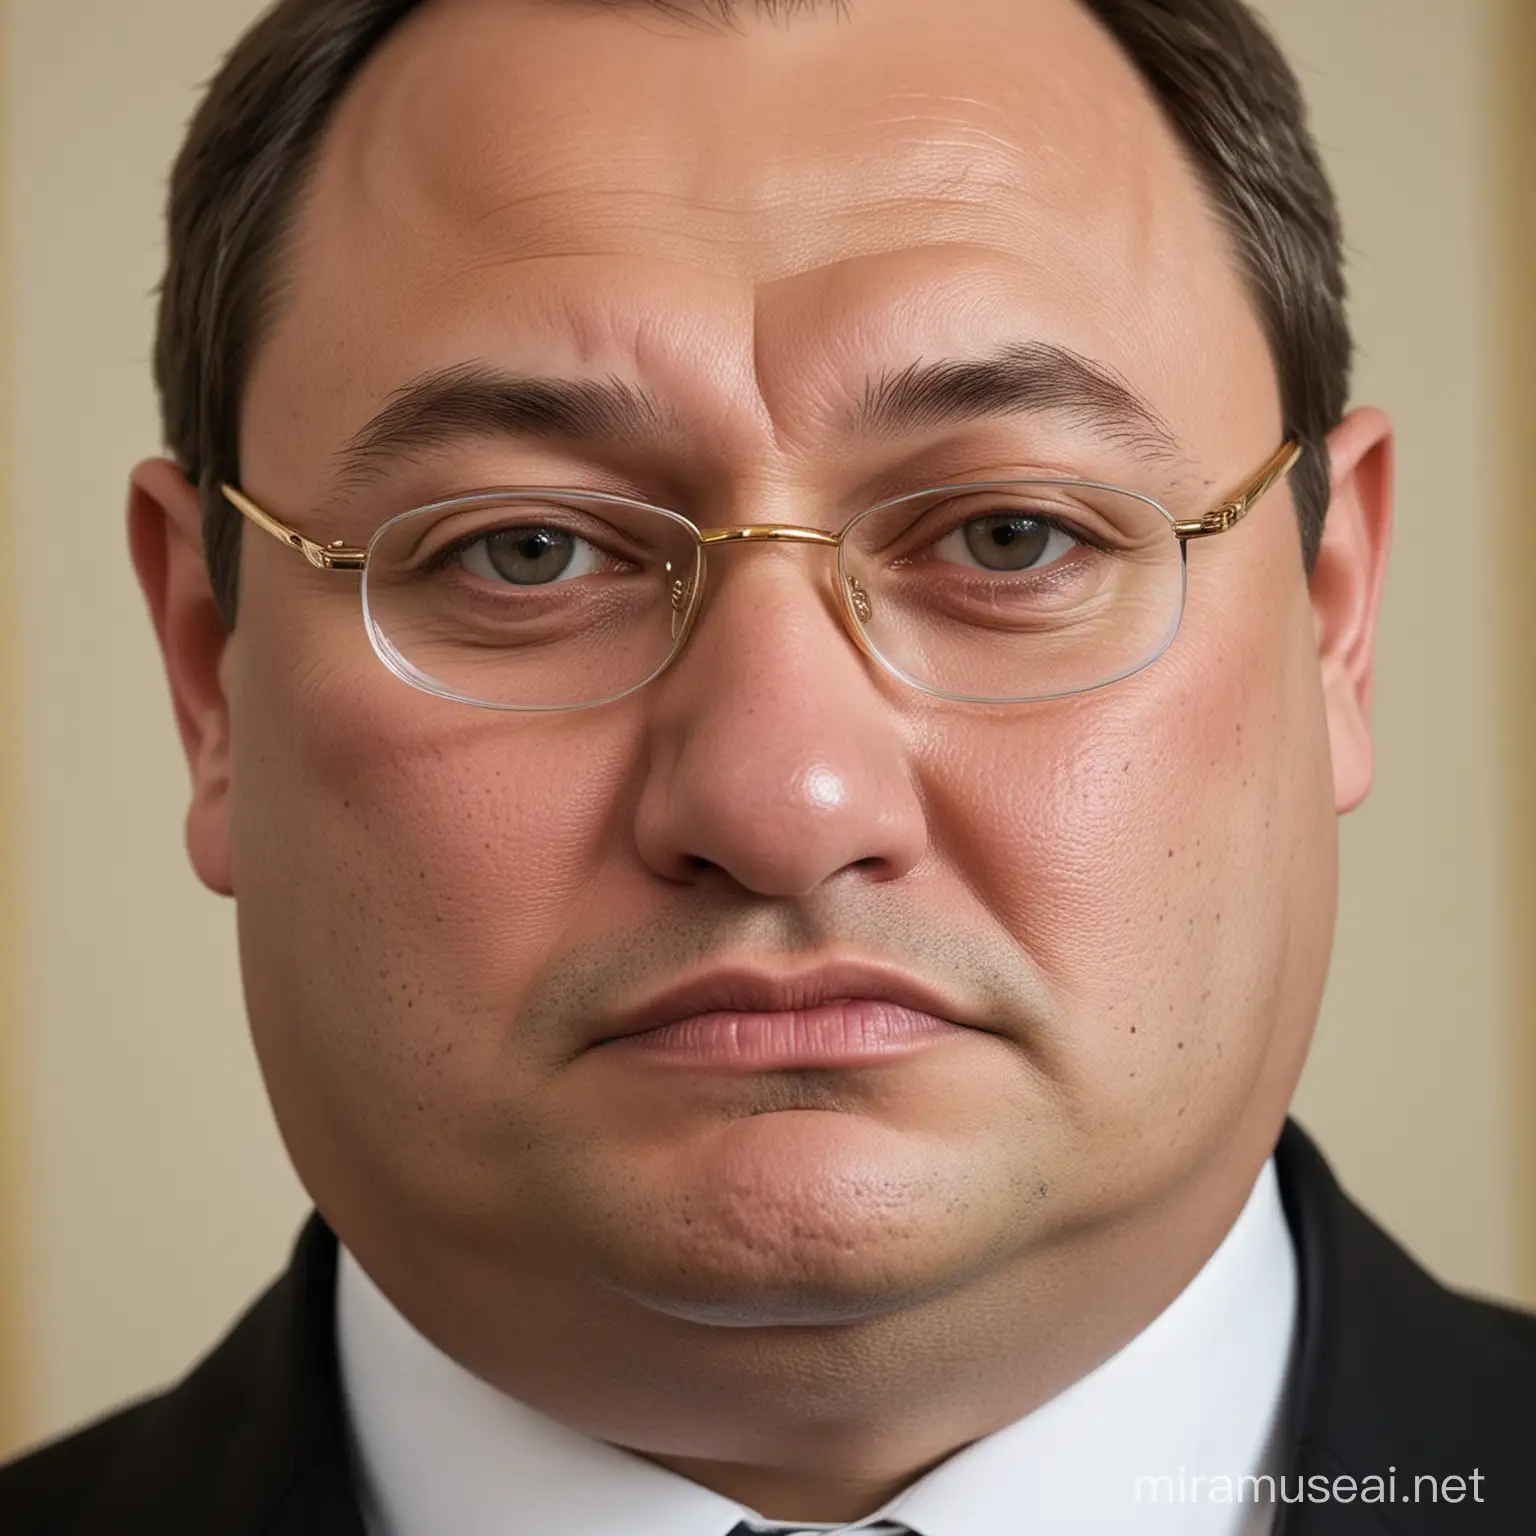 Create a portrait of a 50-year-old Russian lawyer fat as a pig. Despite his newfound wealth, his appearance remains uncertain. His face, round and plump, lacks the sophistication of high society with gold Cartier glasses. He has full cheeks, a wide nose, and there are signs of condescension on his lips. Despite his weight of about 150 kilograms, he radiates confidence and authority. He inspires confidence among ordinary Russian people and is an advocate for them.